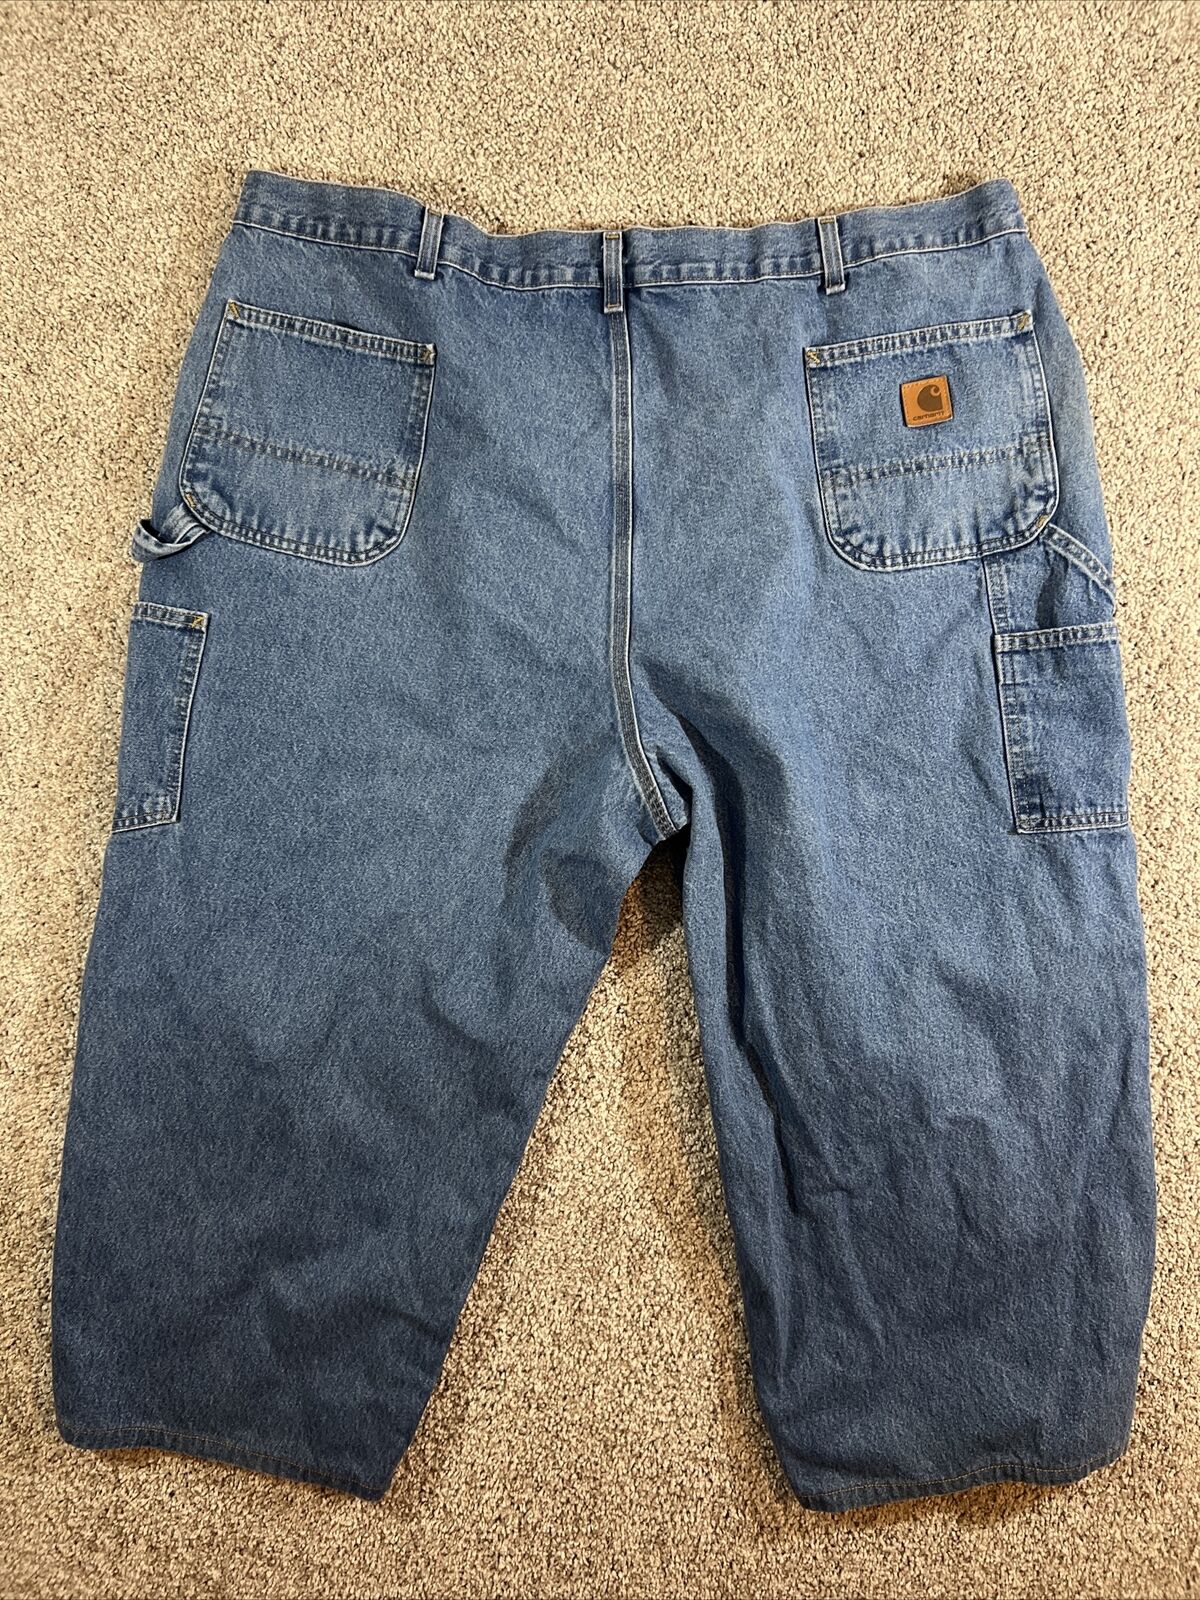 Carhartt Relaxed Fit Jeans - Men's Size 50 X 25 Cotton Denim Rn #14806 ...